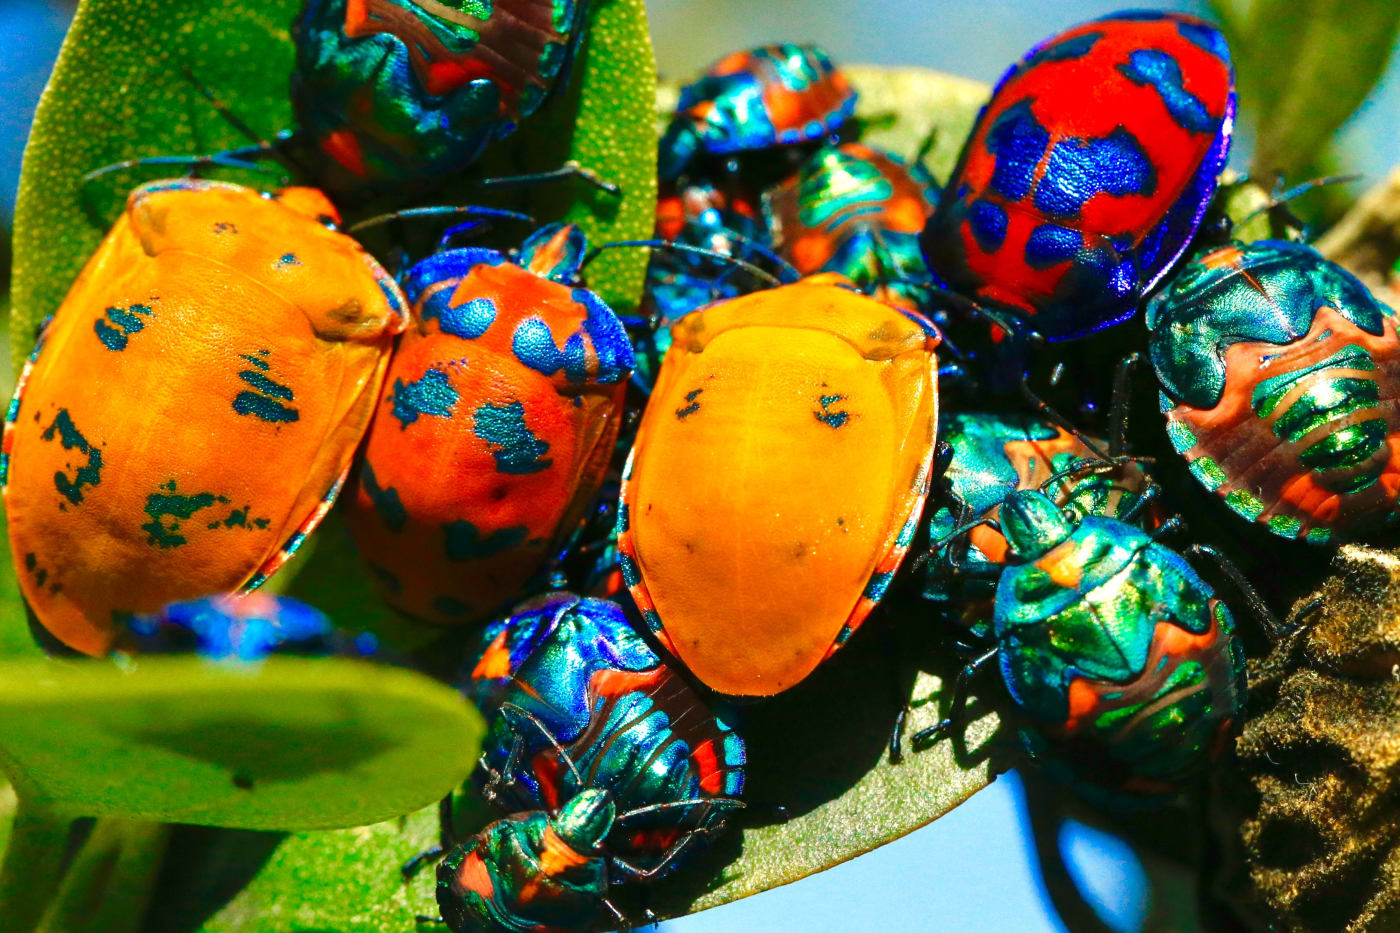 Found in Northern and Eastern Australia, cotton harlequin bugs, sometimes known as the Hibiscus Harlequin Bug.